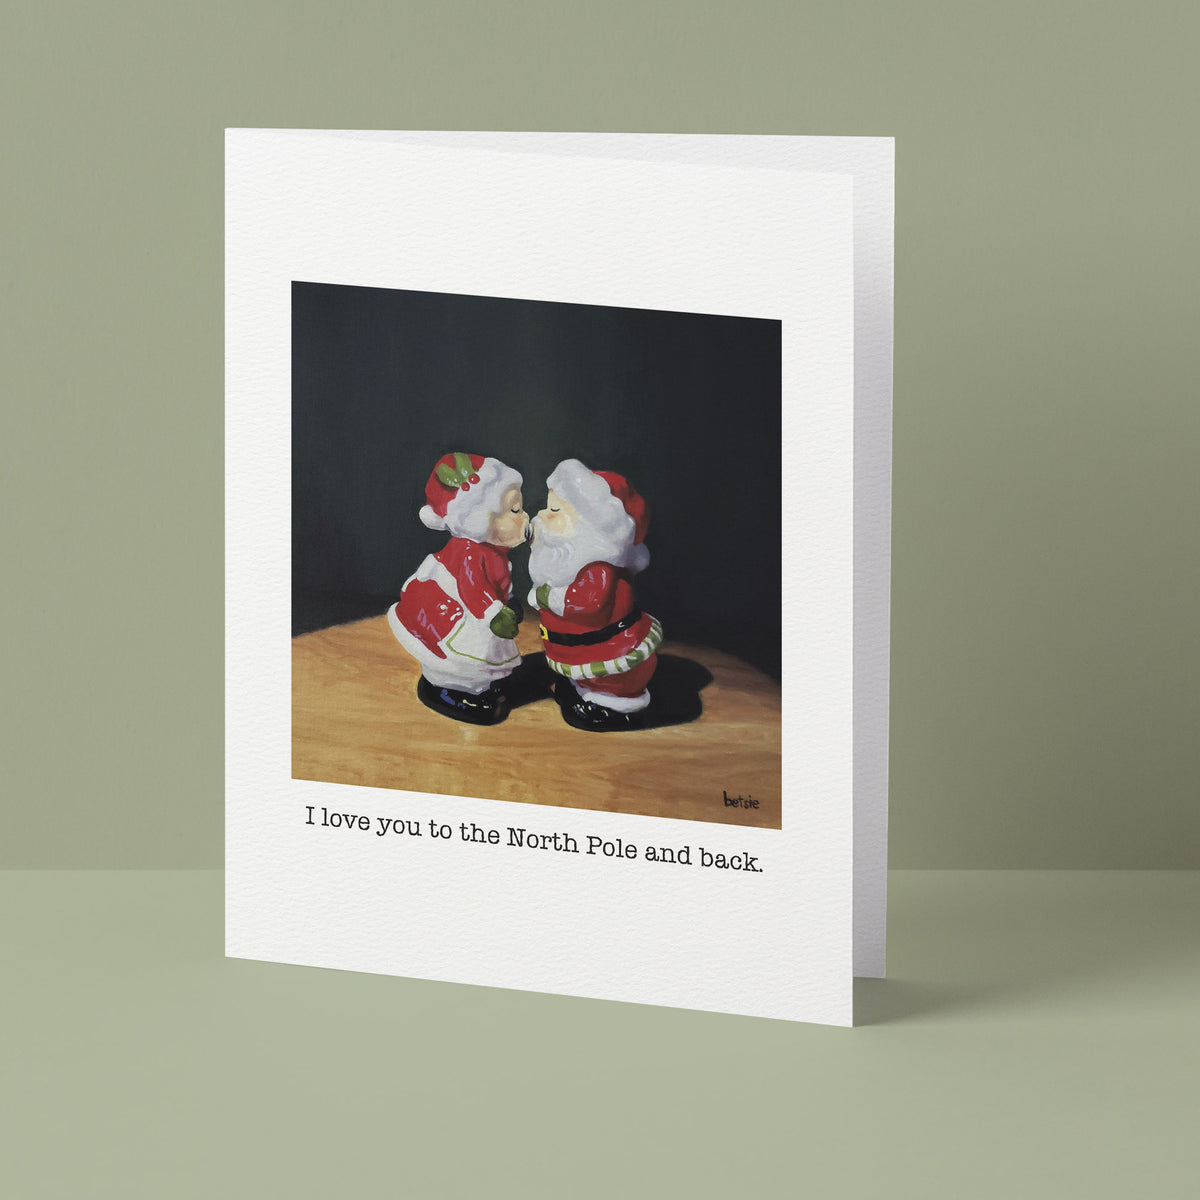 "I love you to the North Pole and back" Greeting Card